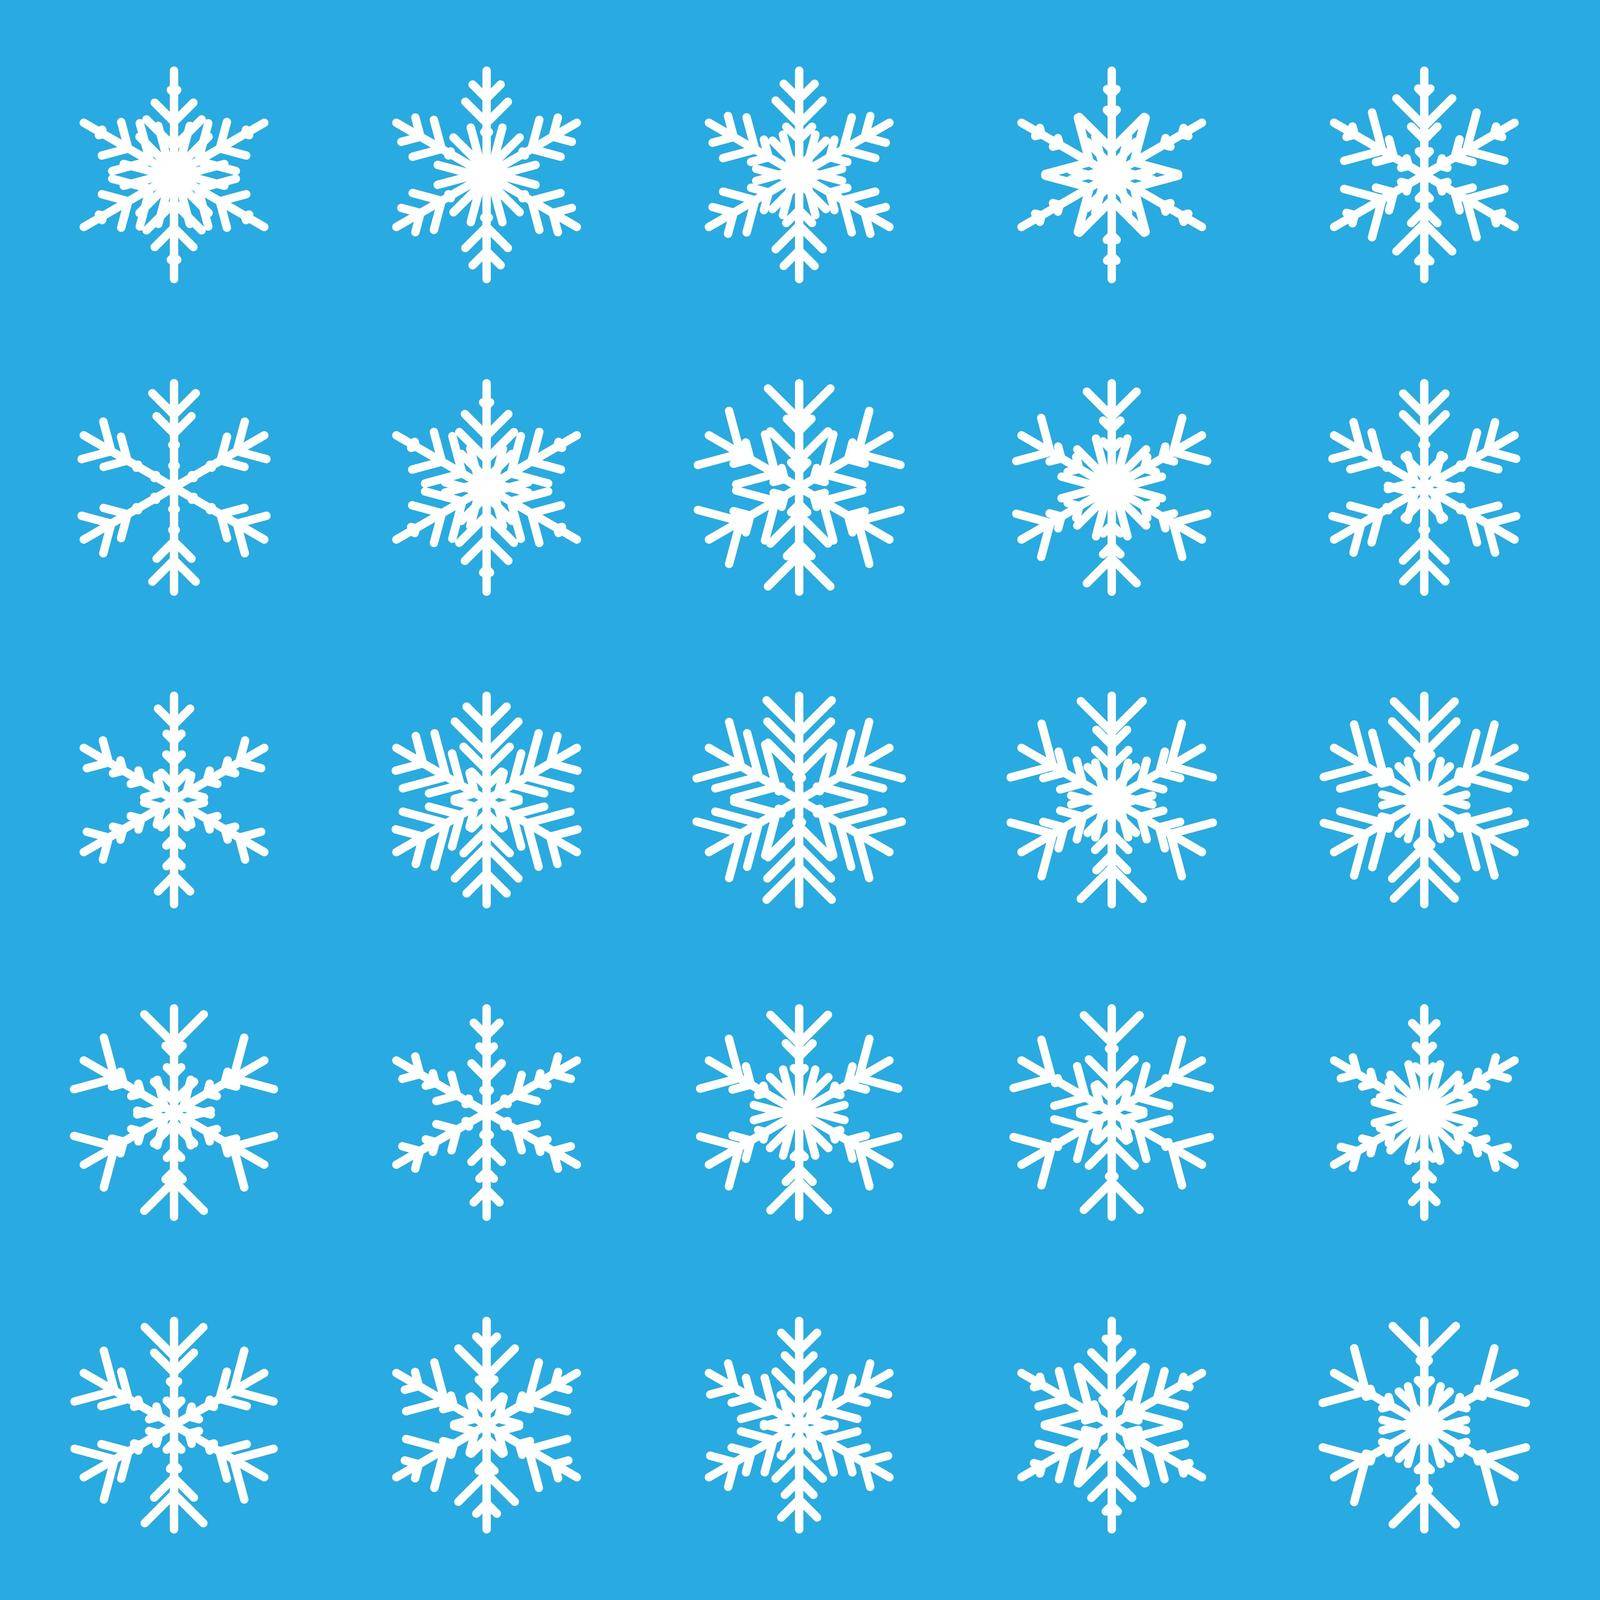 Snowflake set icon in flat style. Snow flake winter vector illustration on isolated background. Christmas snowfall snowflakes ornament collection business concept.